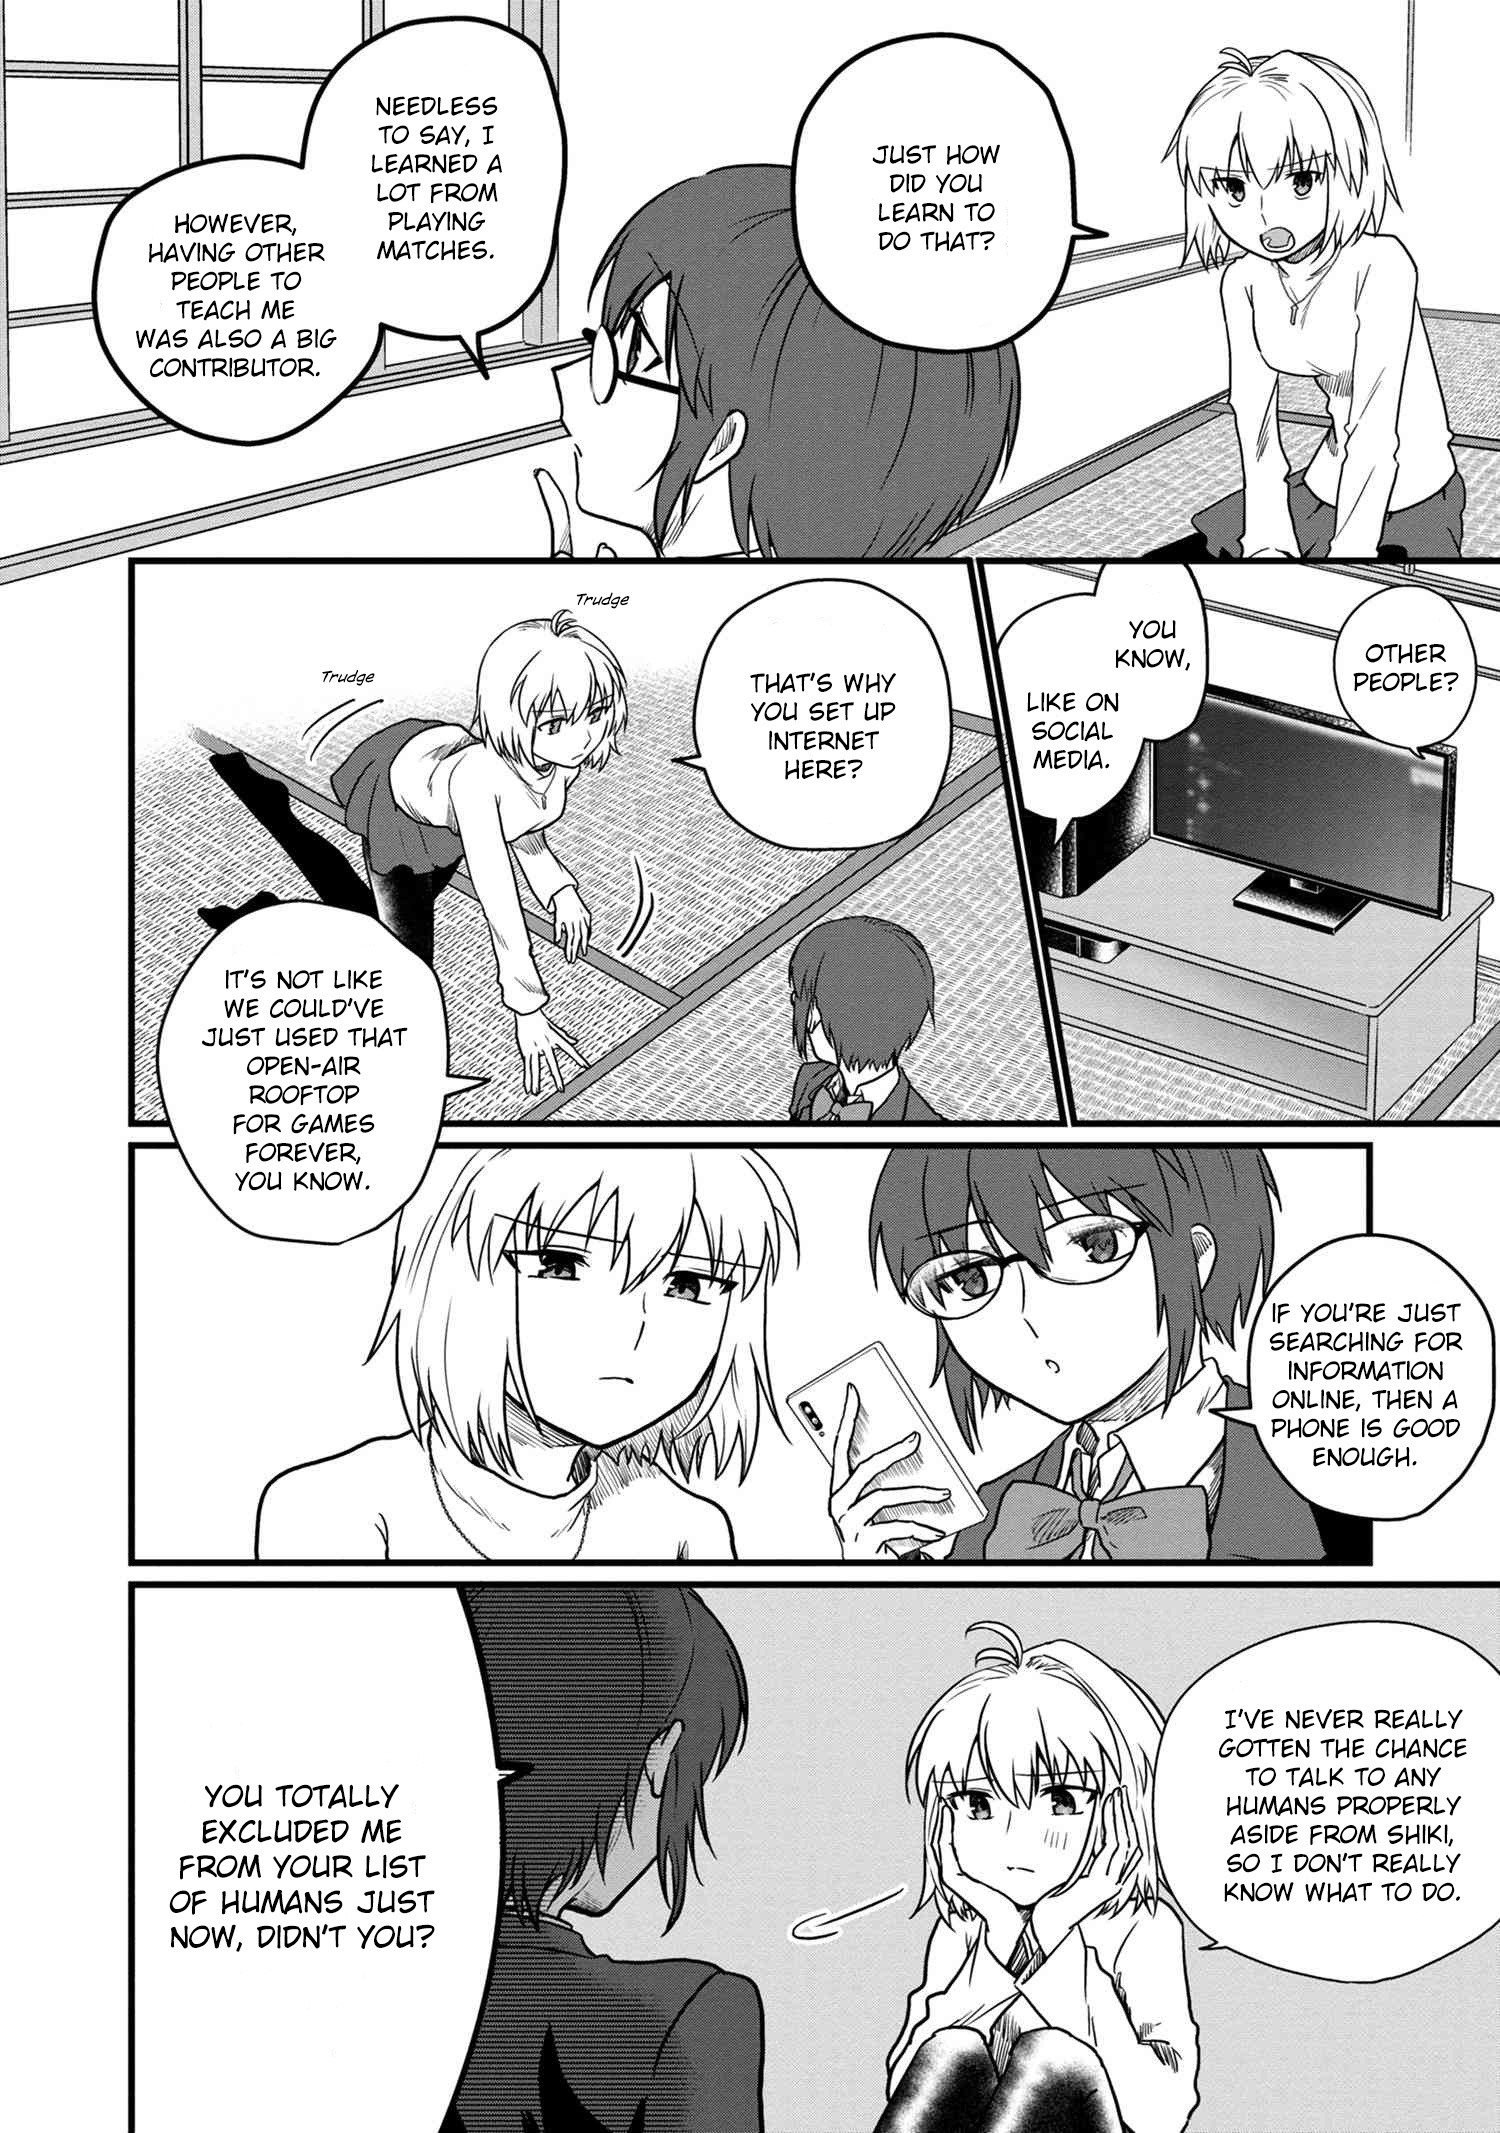 Melty Blood: Type Lumina Piece In Paradise - chapter 8.2 - #4